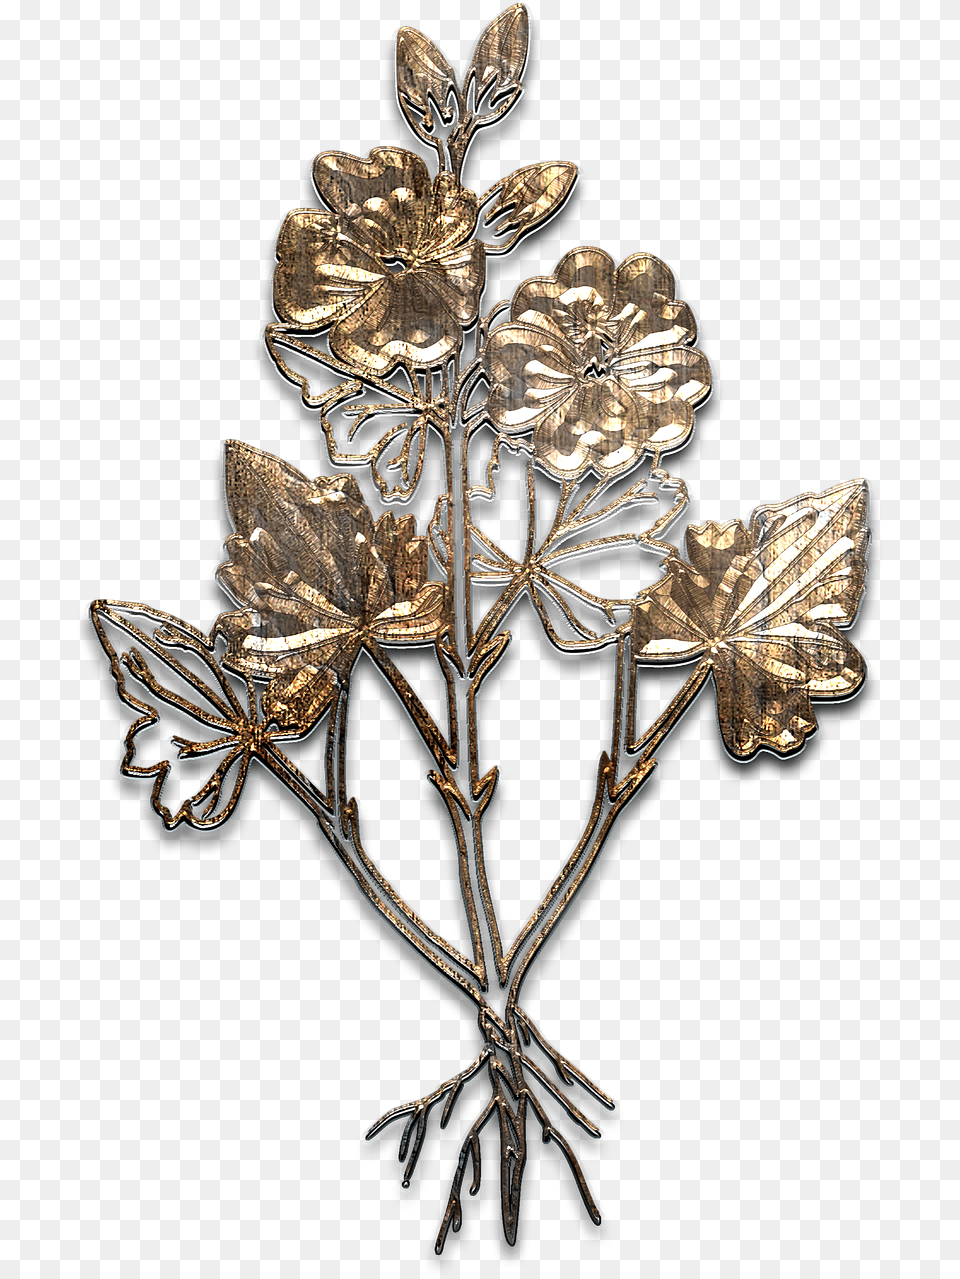 Flower Metal Aged Gold Texture Graphic Gold, Accessories, Brooch, Chandelier, Jewelry Png Image